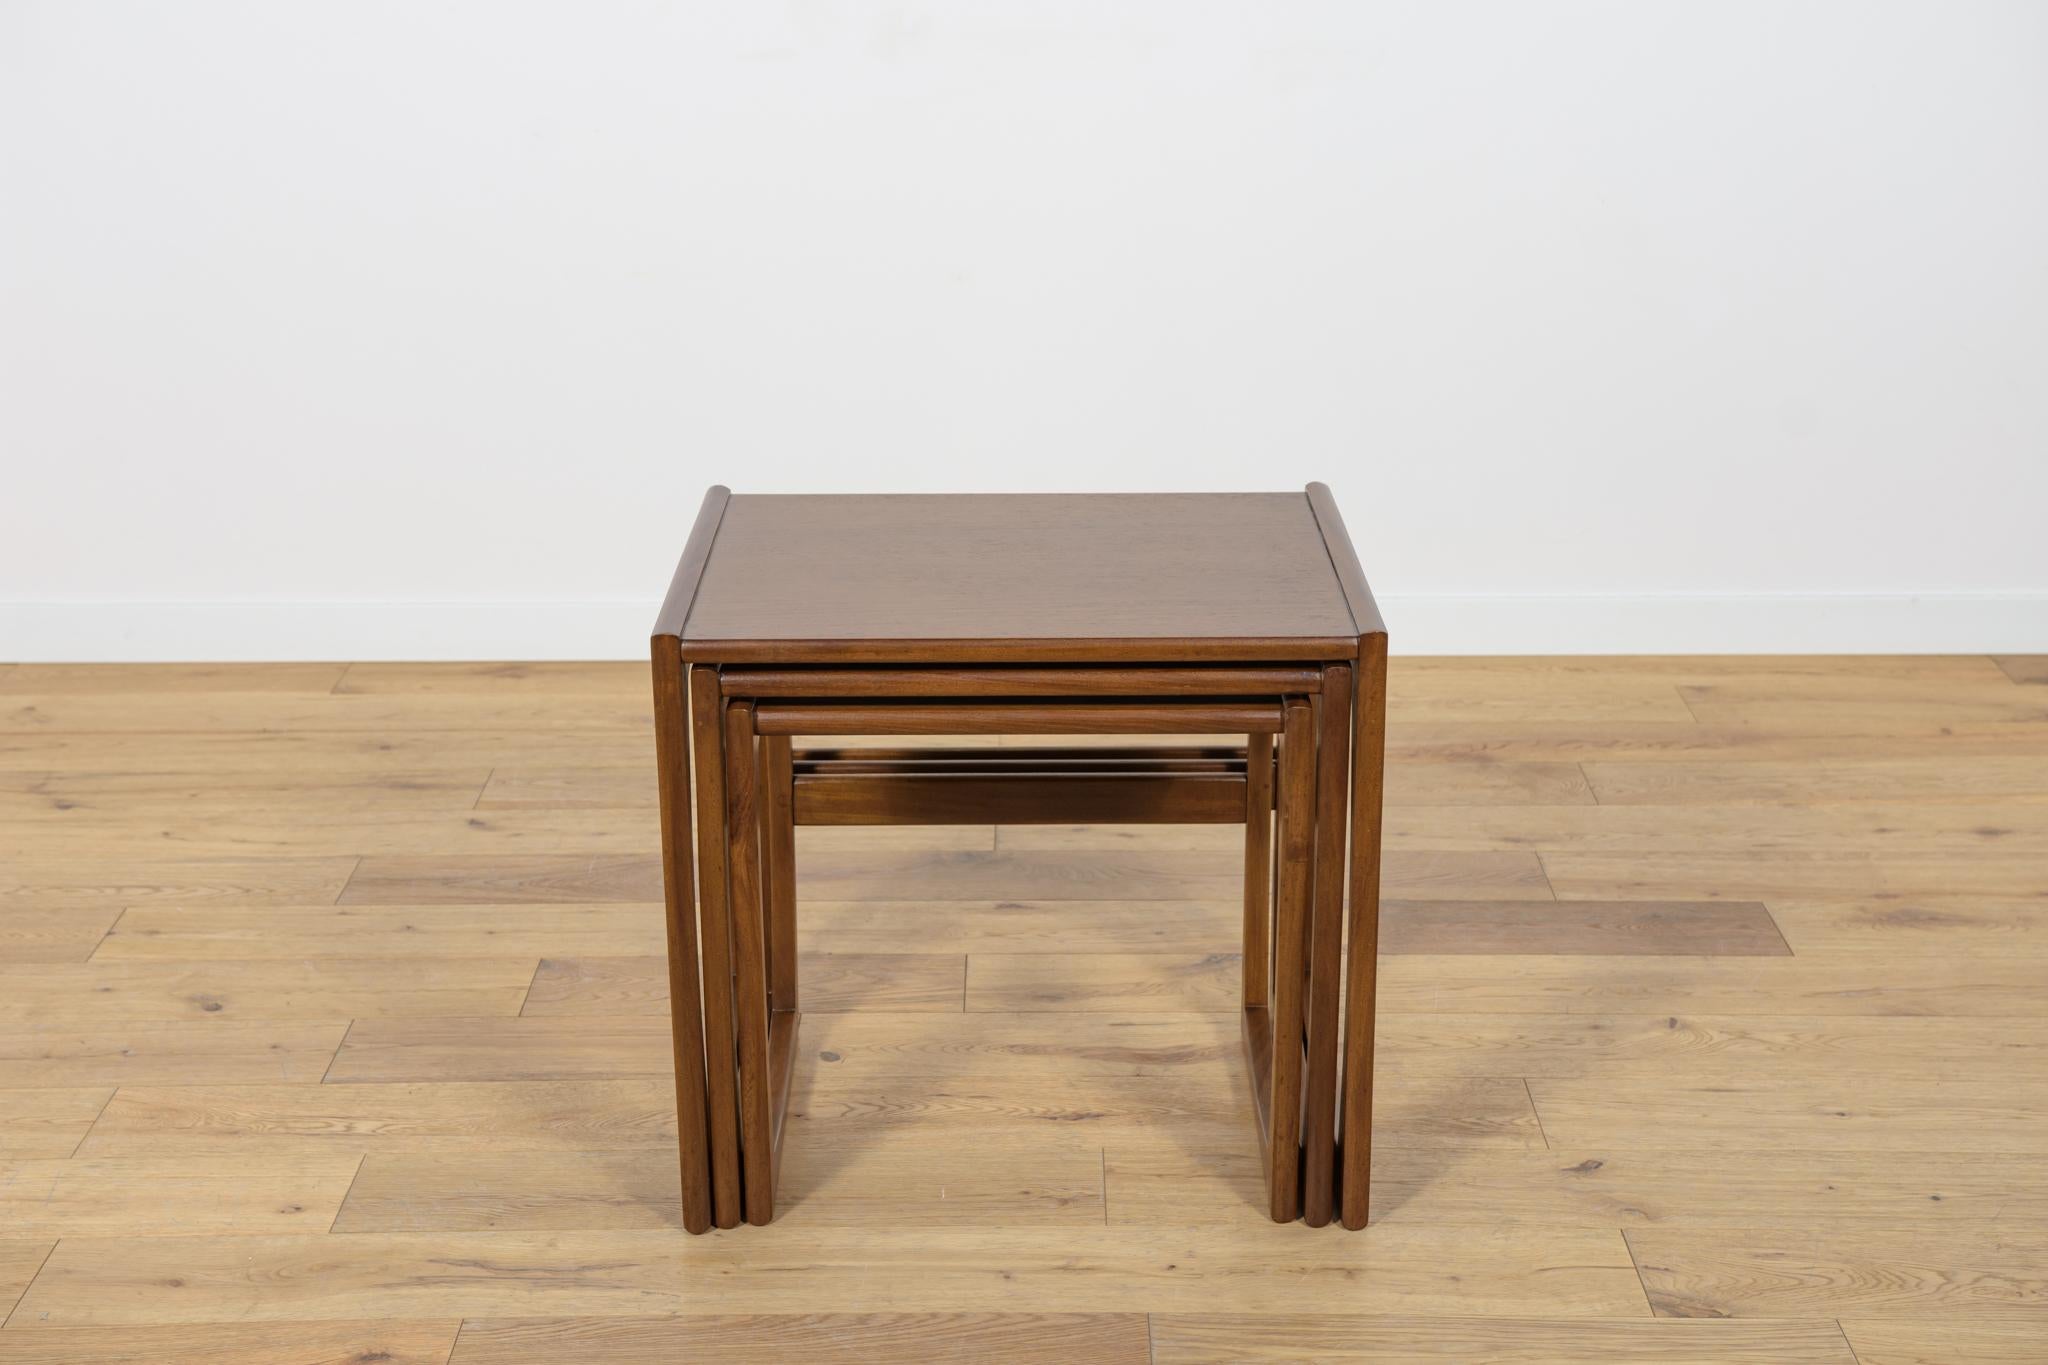 
This set of three pull out tables was designed by R. Benett for G-Plan. The teak elements have been cleaned old surface, polished and painted in an oak mordant and finished lacquer.
Big table: W 53 x D 43 x H 49.
Medium table: W 48 x D 42 x H